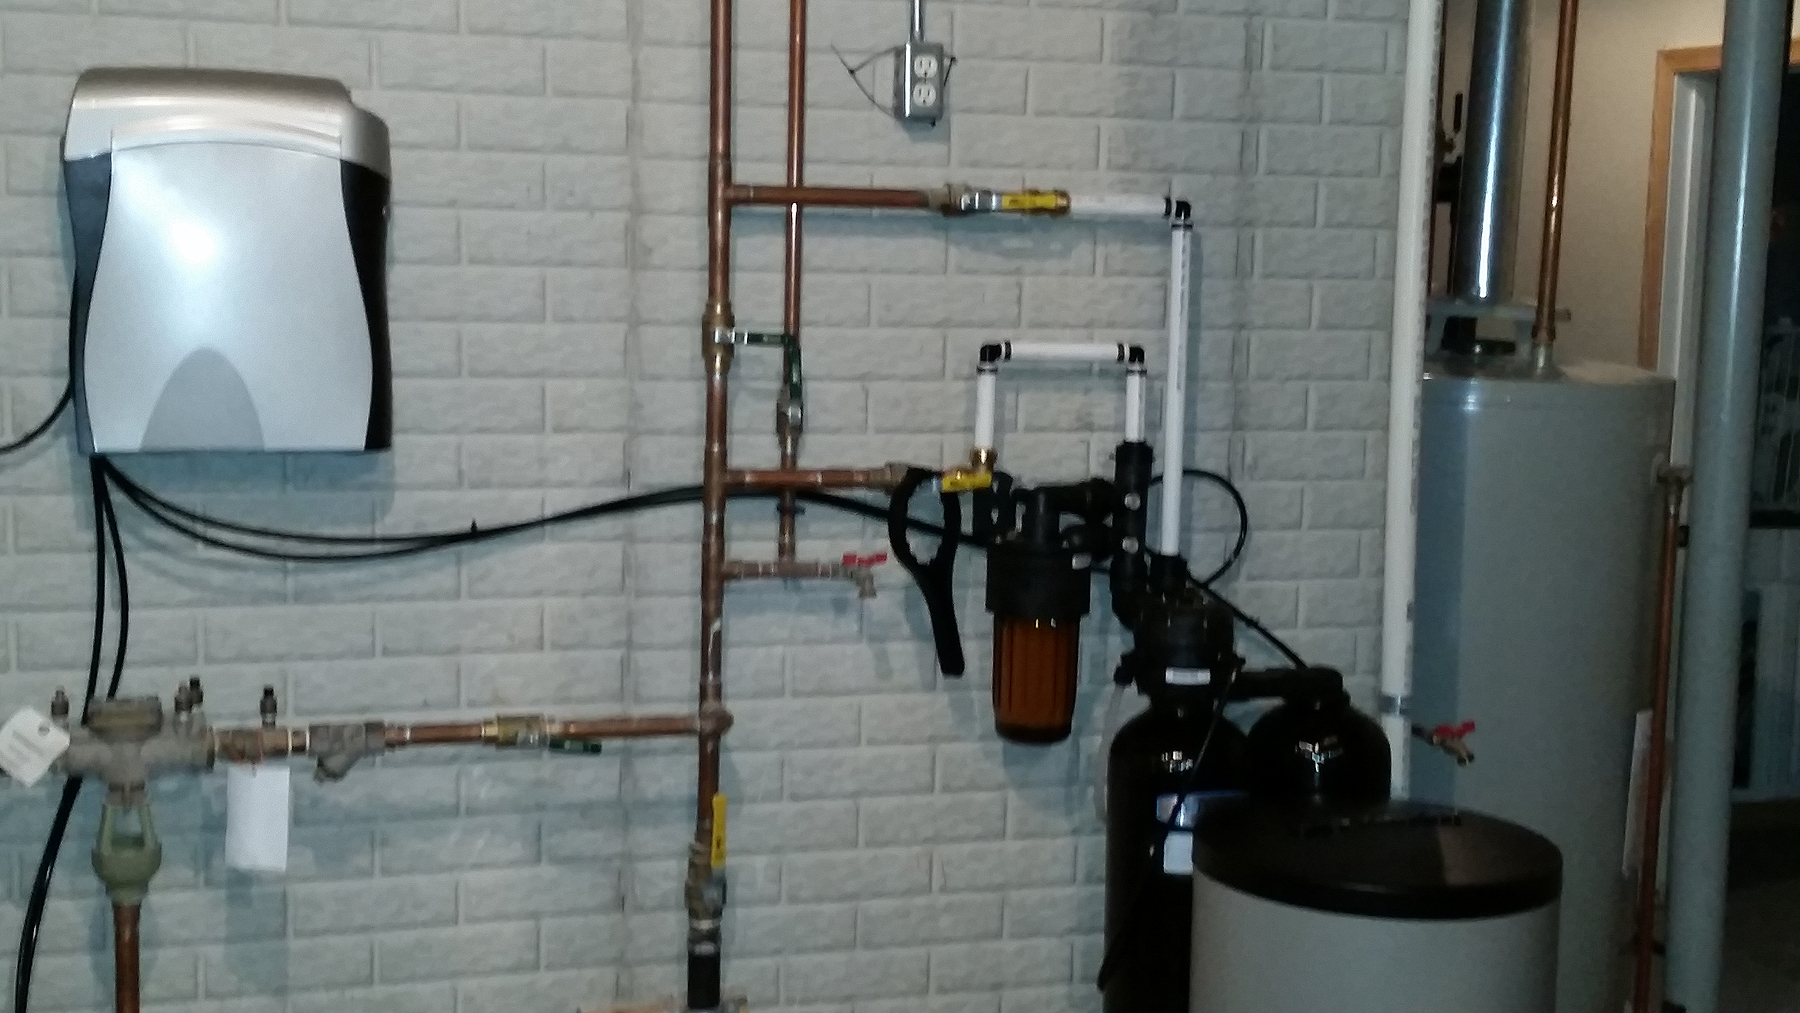 Kinetico’s Whole House Water Filtration System installed in Bettendorf, Iowa